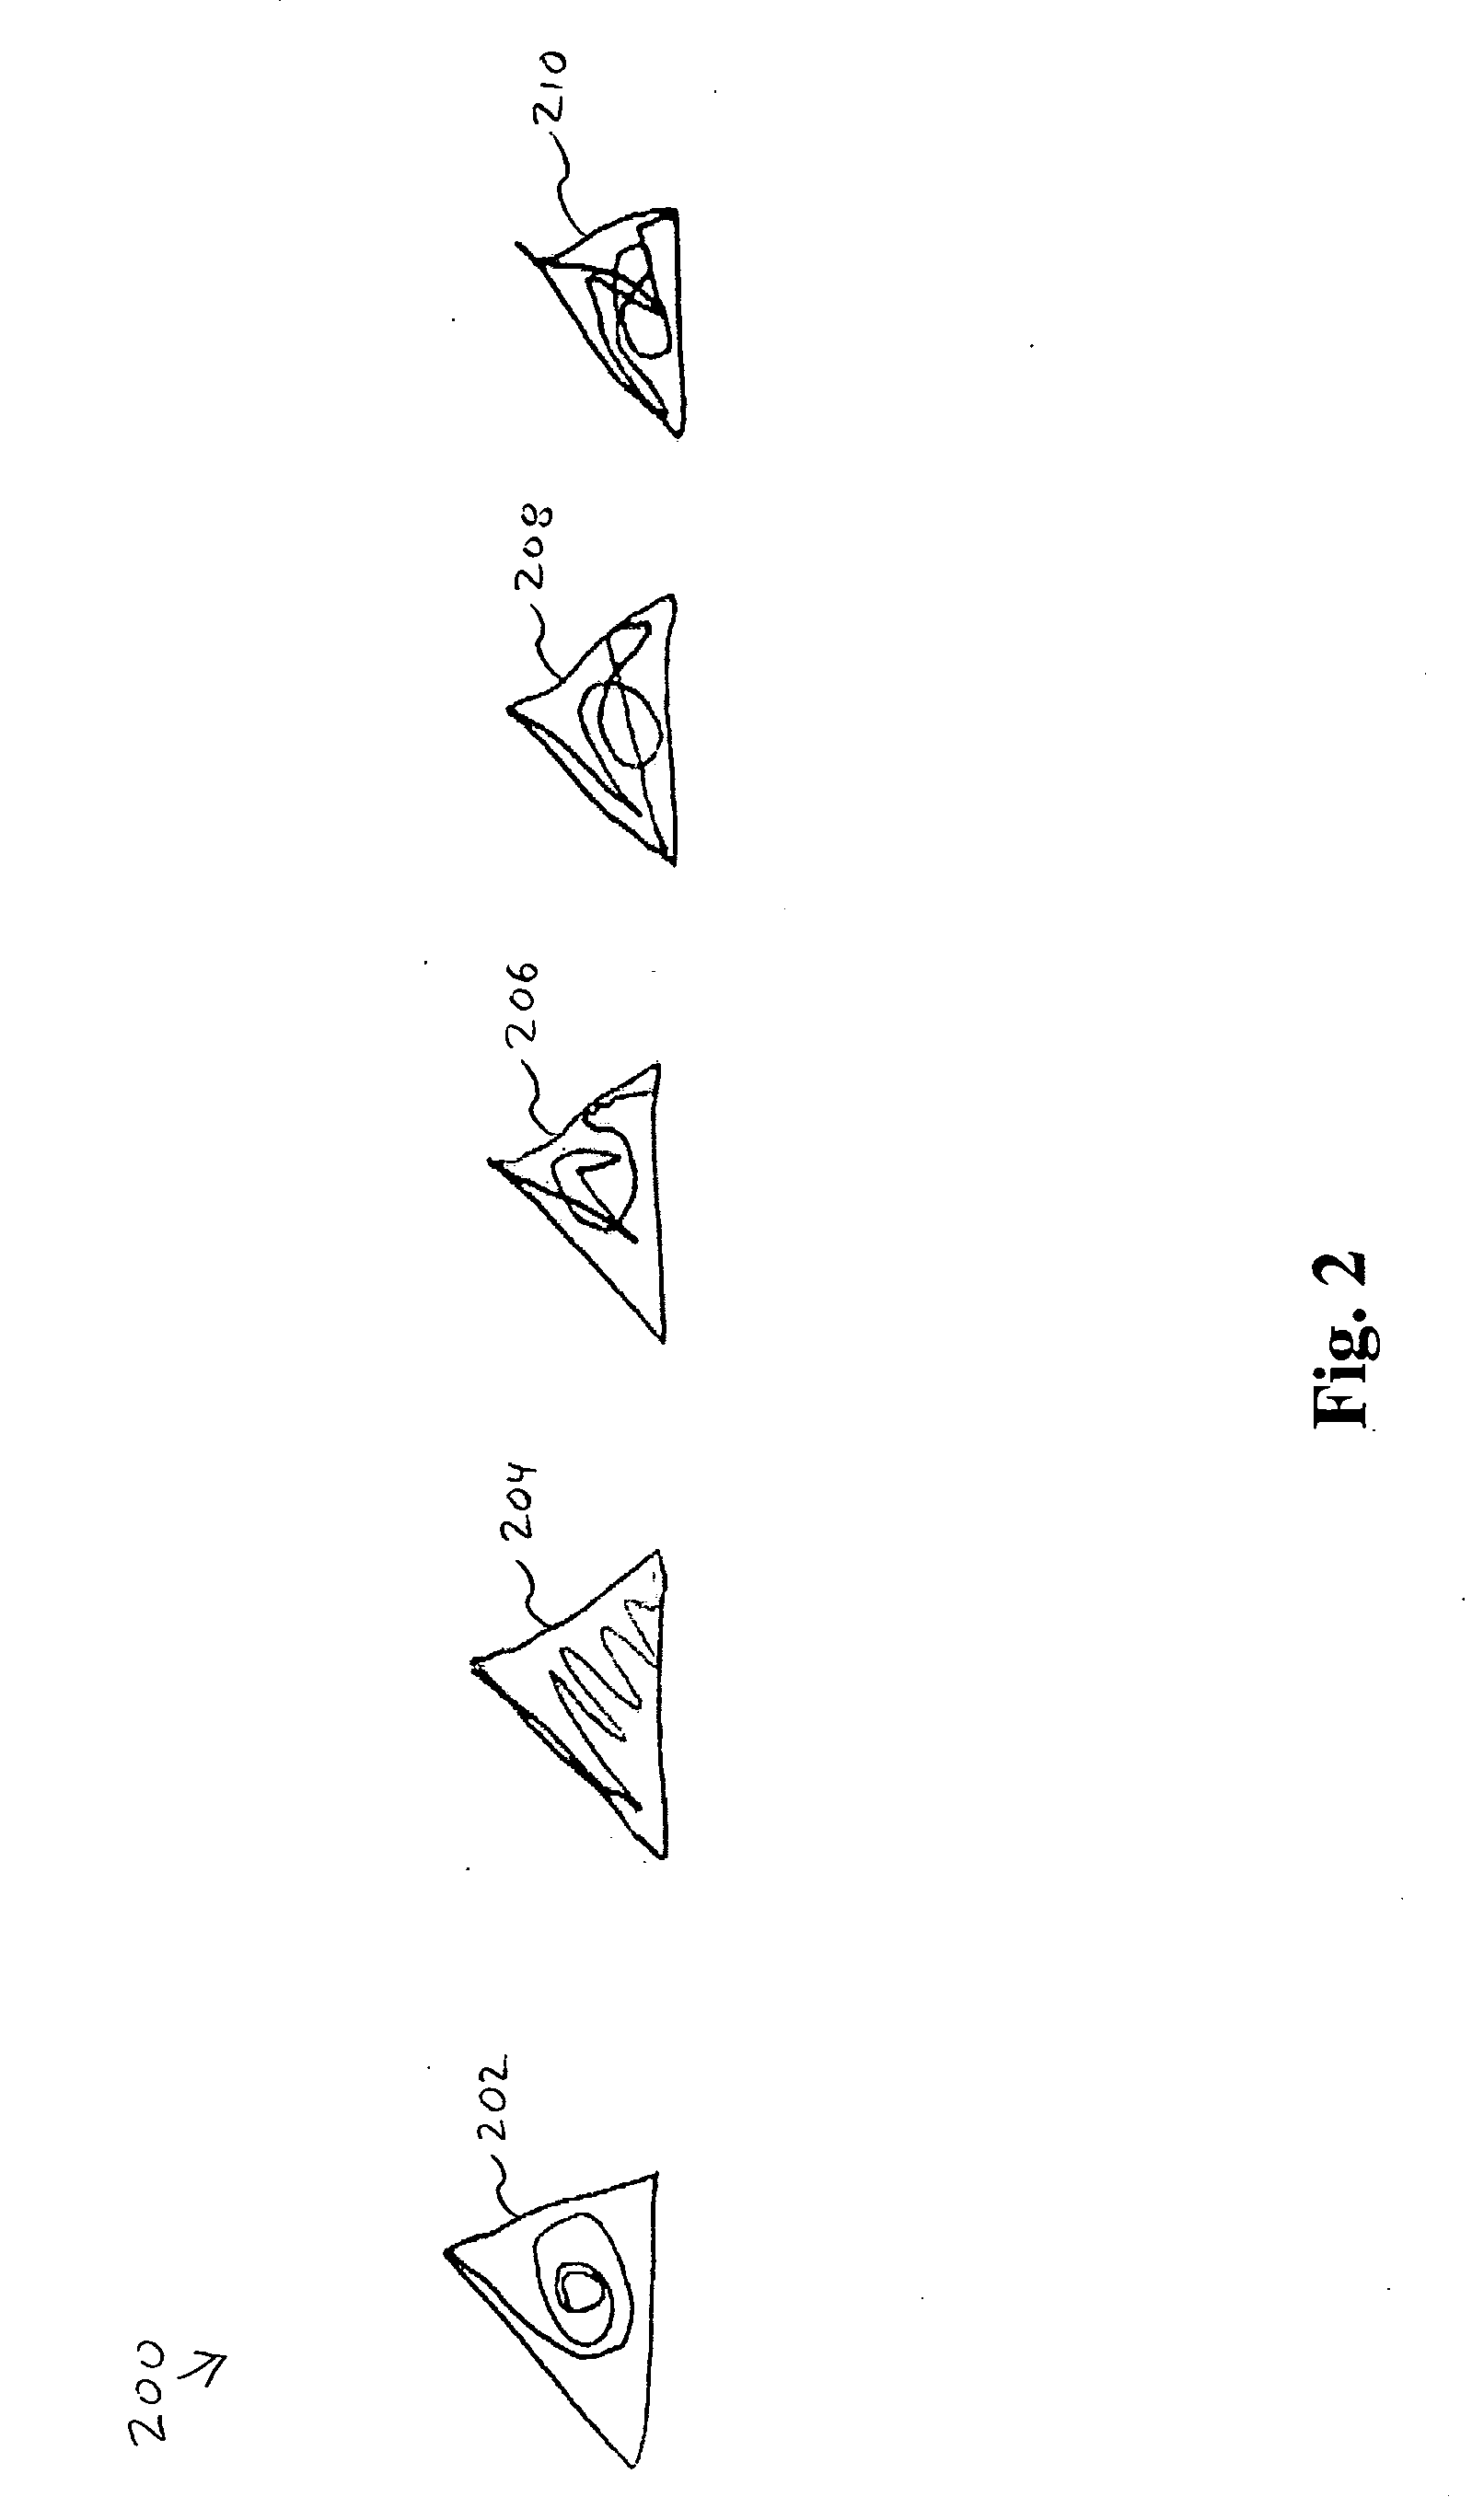 System and method for information management using handwritten identifiers